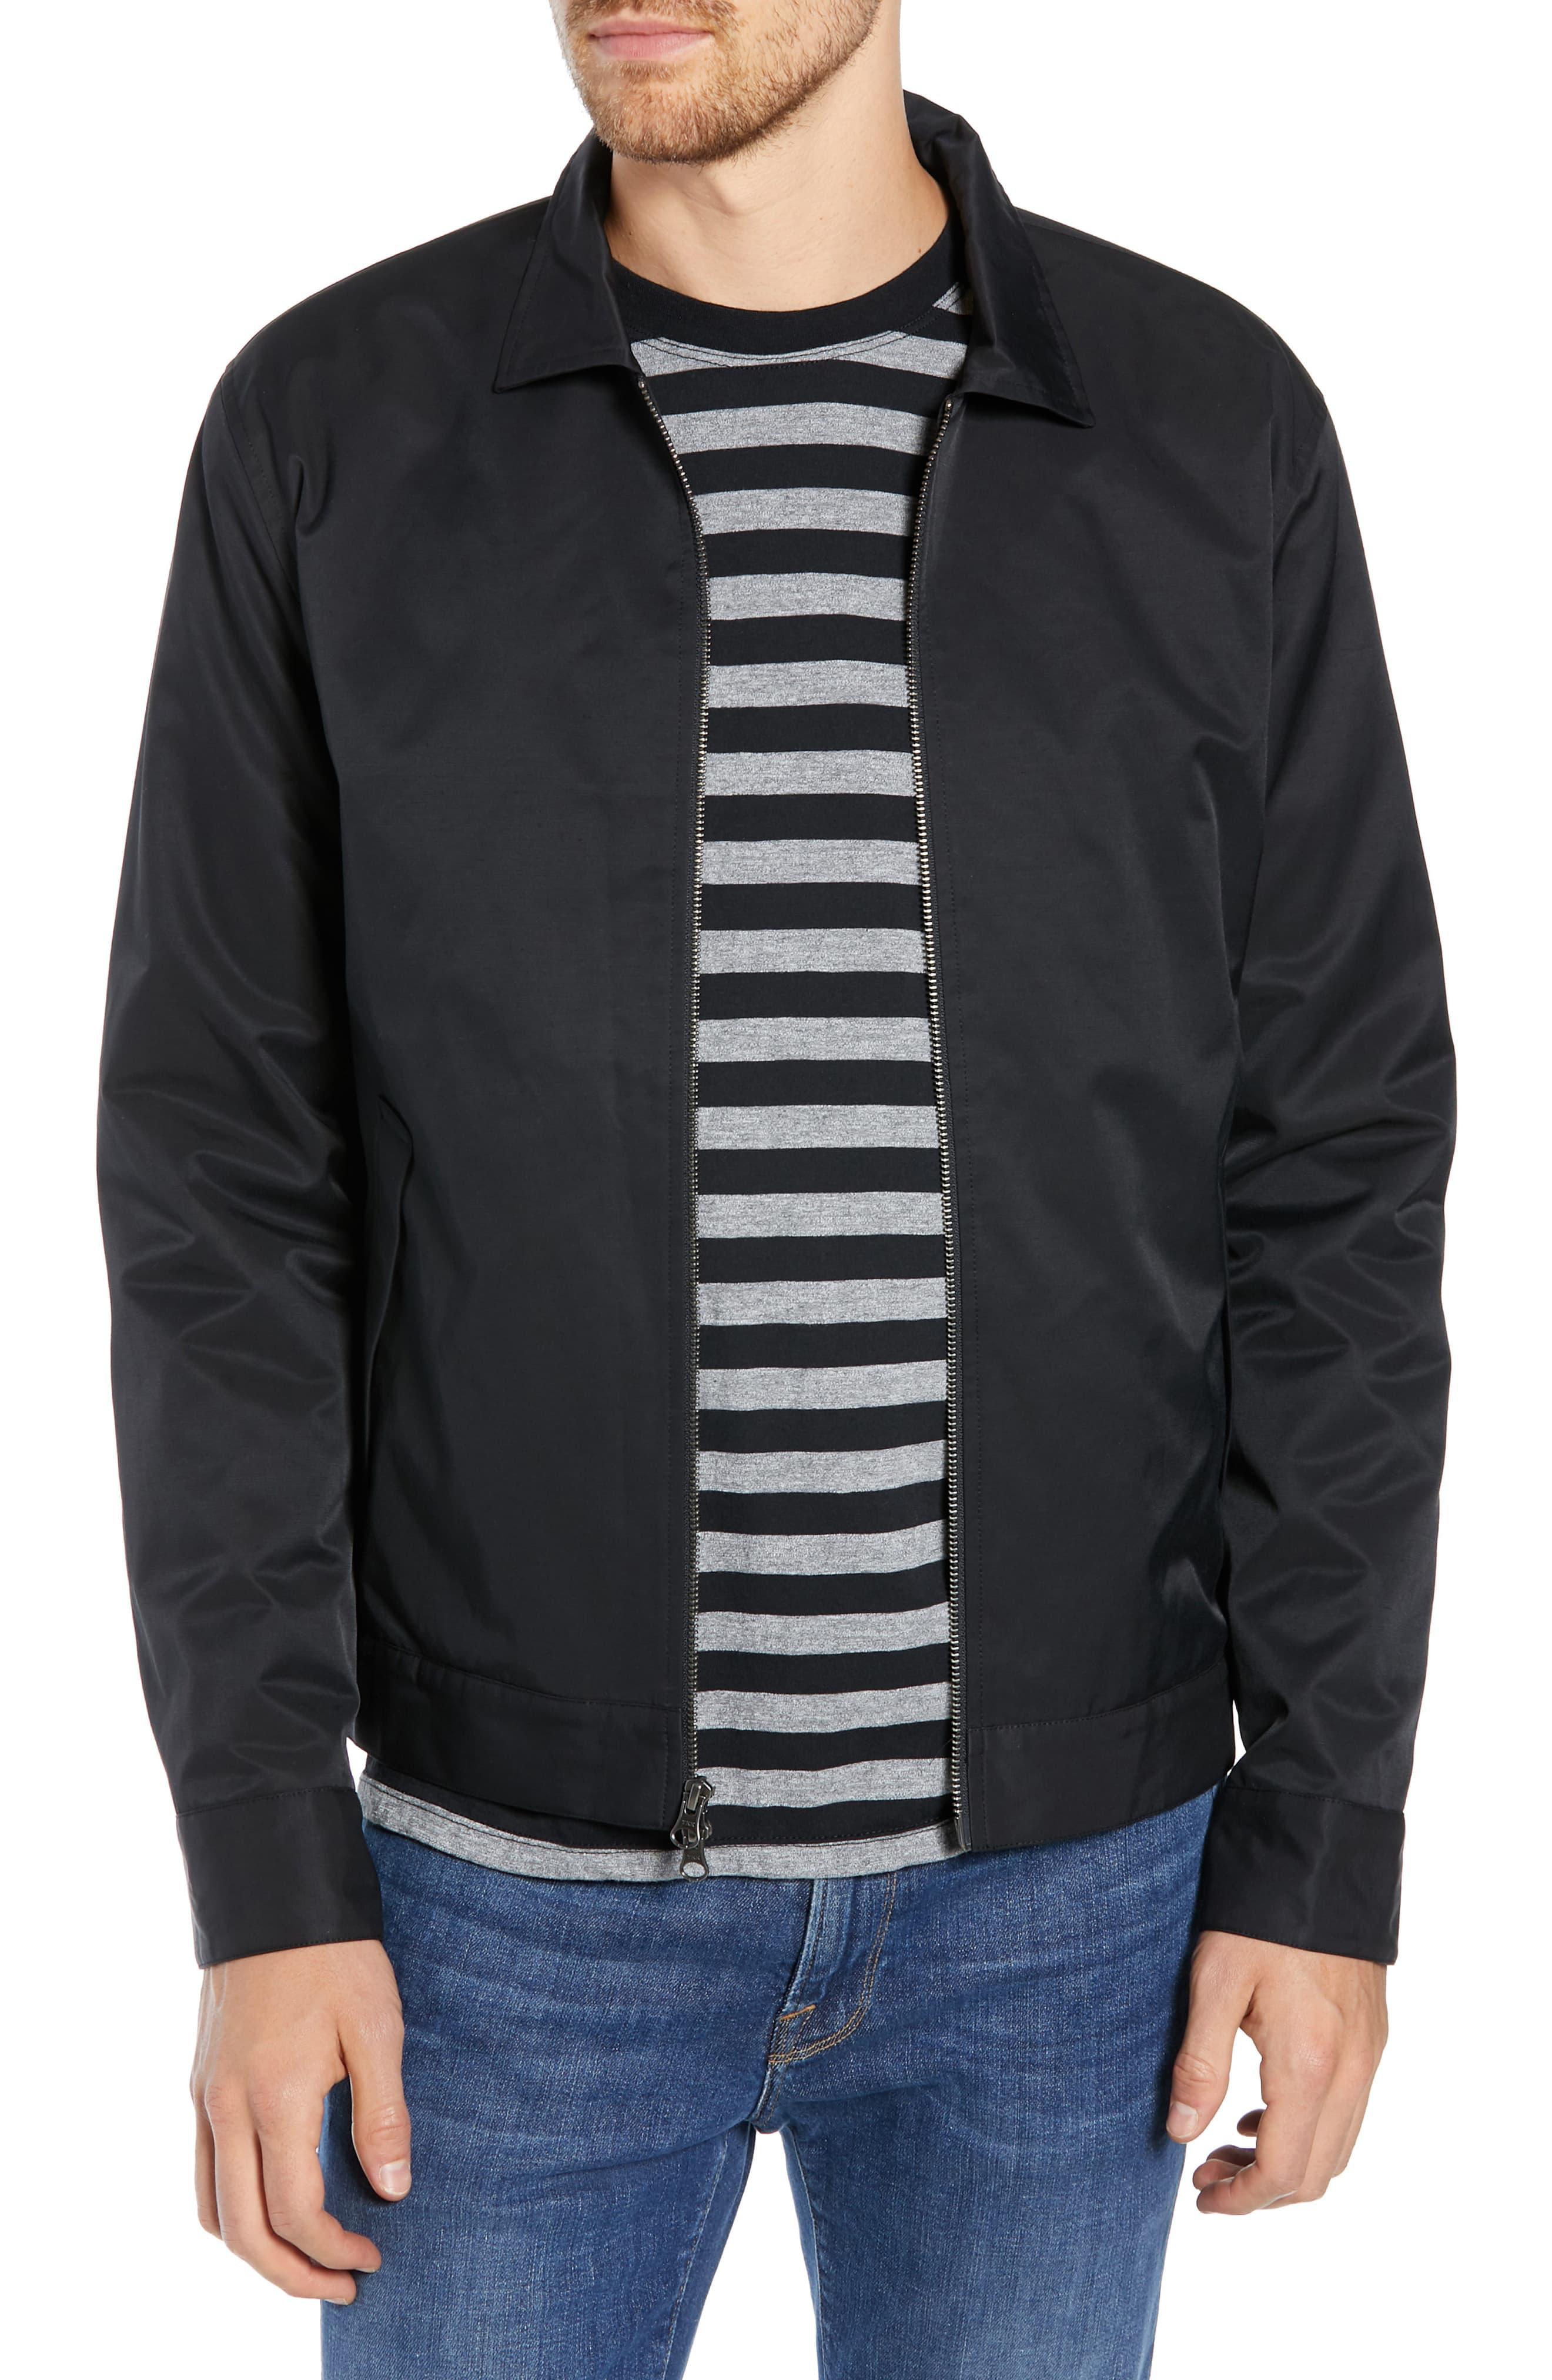 FRAME Slim Fit Jacket With Quilted Lining in Black for Men - Lyst